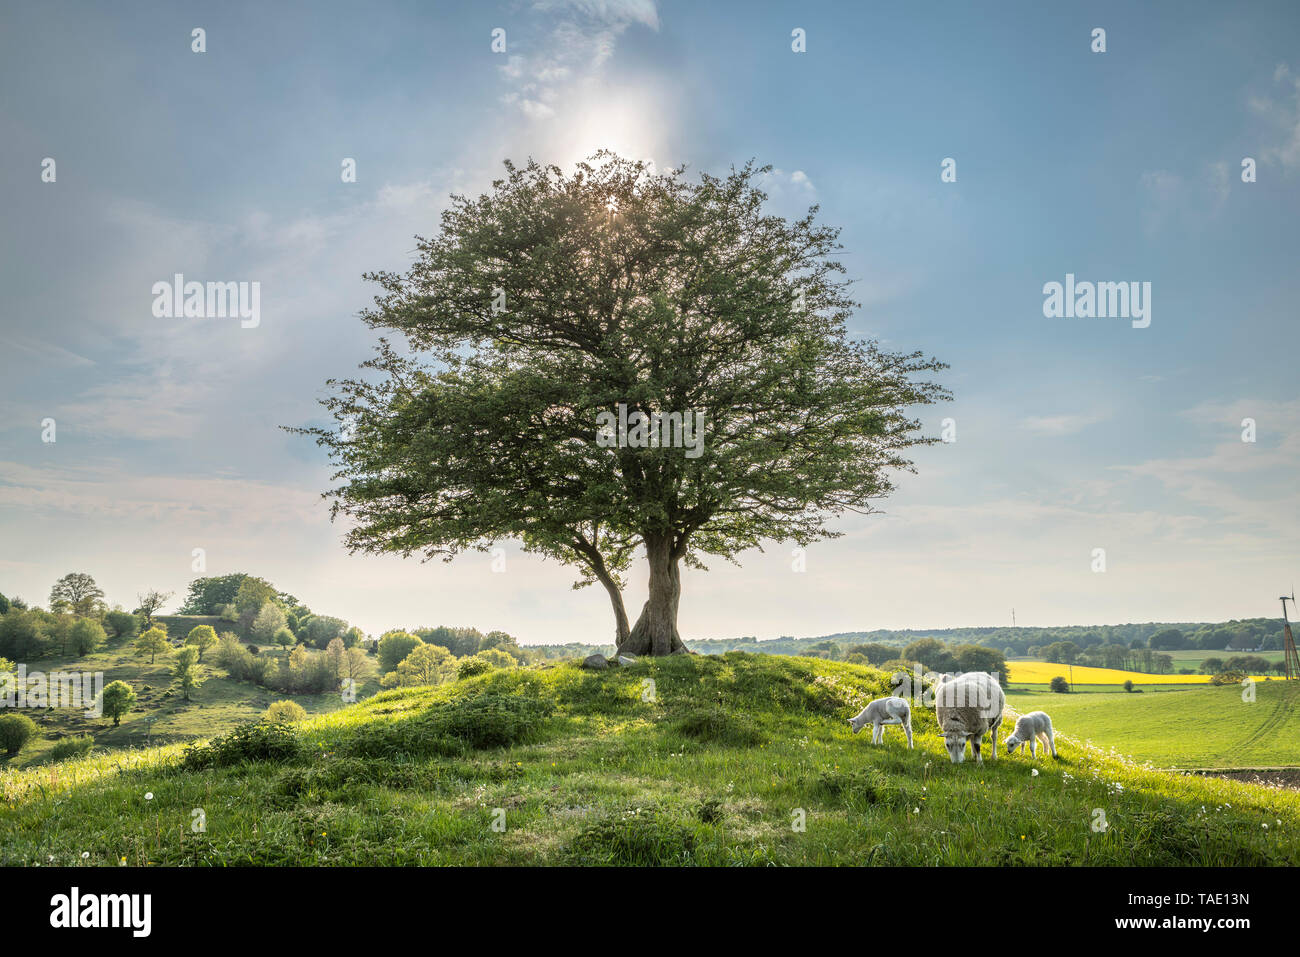 Two baby lambs grazing under a lone tree at a hilltop  in a rural landscape at the hills of Rorum in Osterlen, Skane, Sweden, Scandinavia. Stock Photo